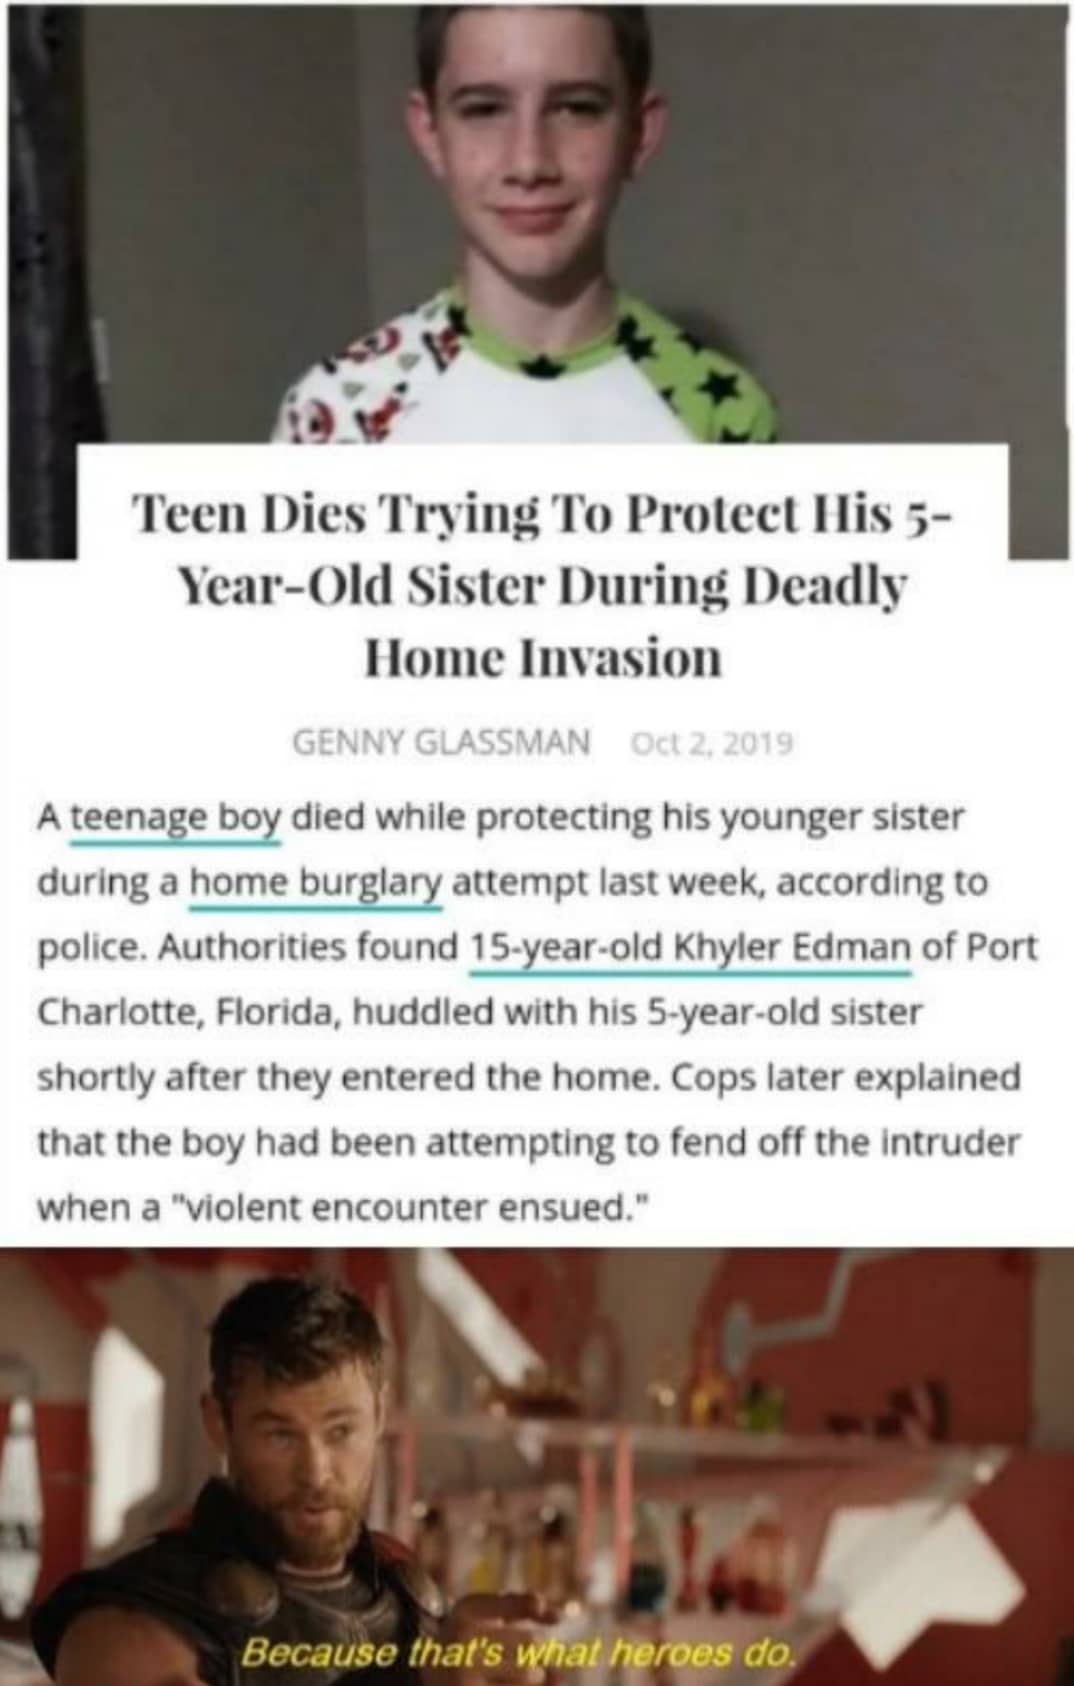 cute wholesome-memes cute text: Teen Dies Trying To Protect Ilis 3- Ycar-()ld Sister I)uring Deadly Ilontc Invasion GENNY GLASSMAN 2. A teenage boy died while protecting his younger sister during a home burglary attempt last week, according to police. Authorities found 15-year-old Khyler Edman of Port Charlotte, Florida, huddled with his 5-year-old sister shortly after they entered the home. Cops later explained that the boy had been attempting to fend off the intruder when a 